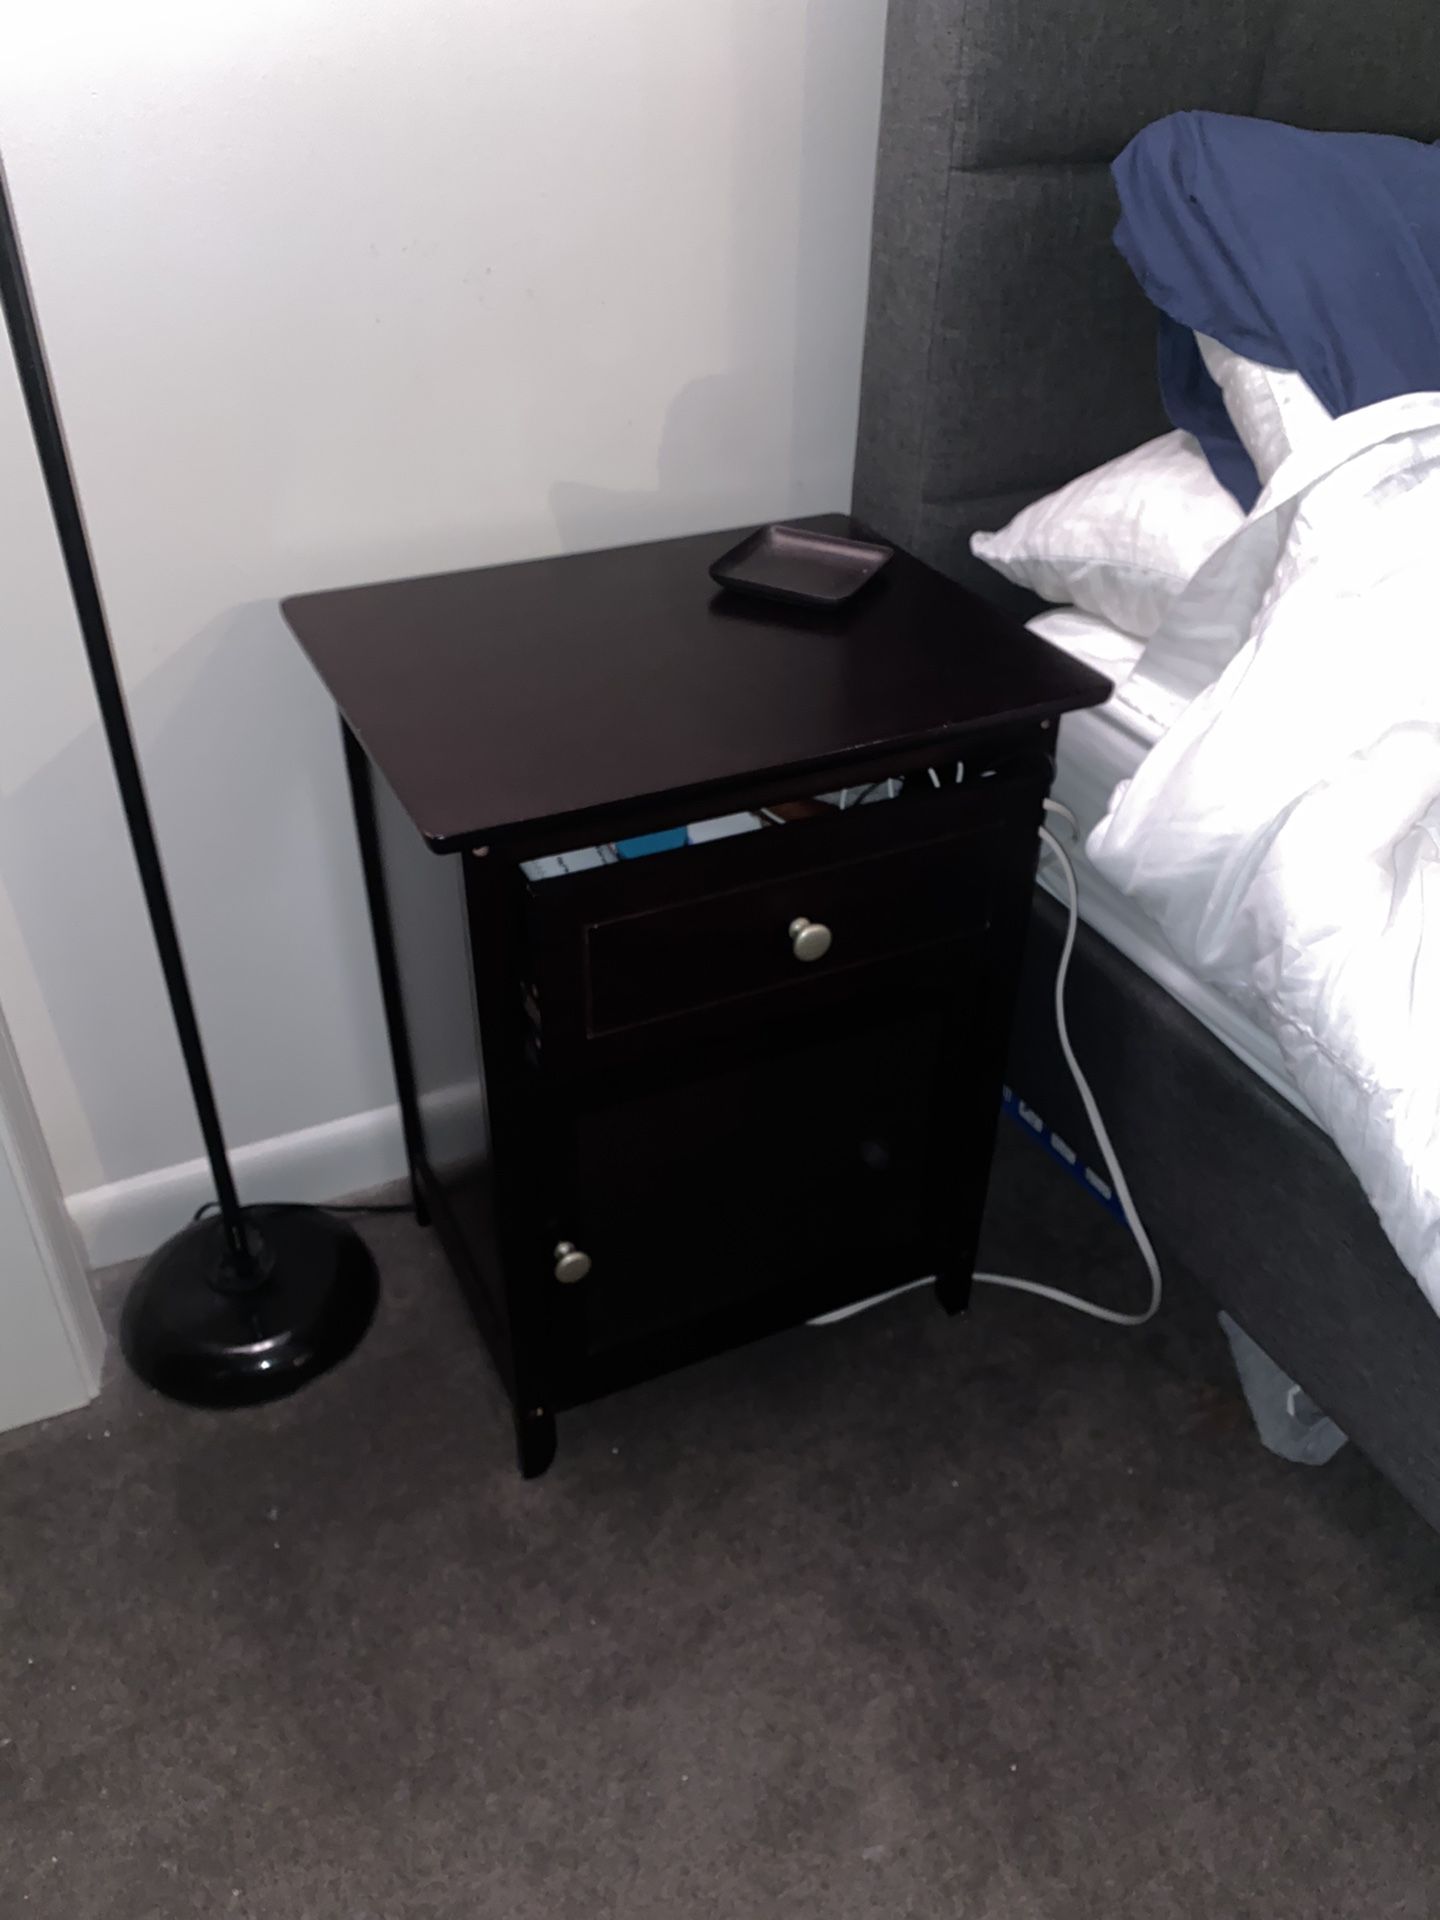 2 night stands or end tables